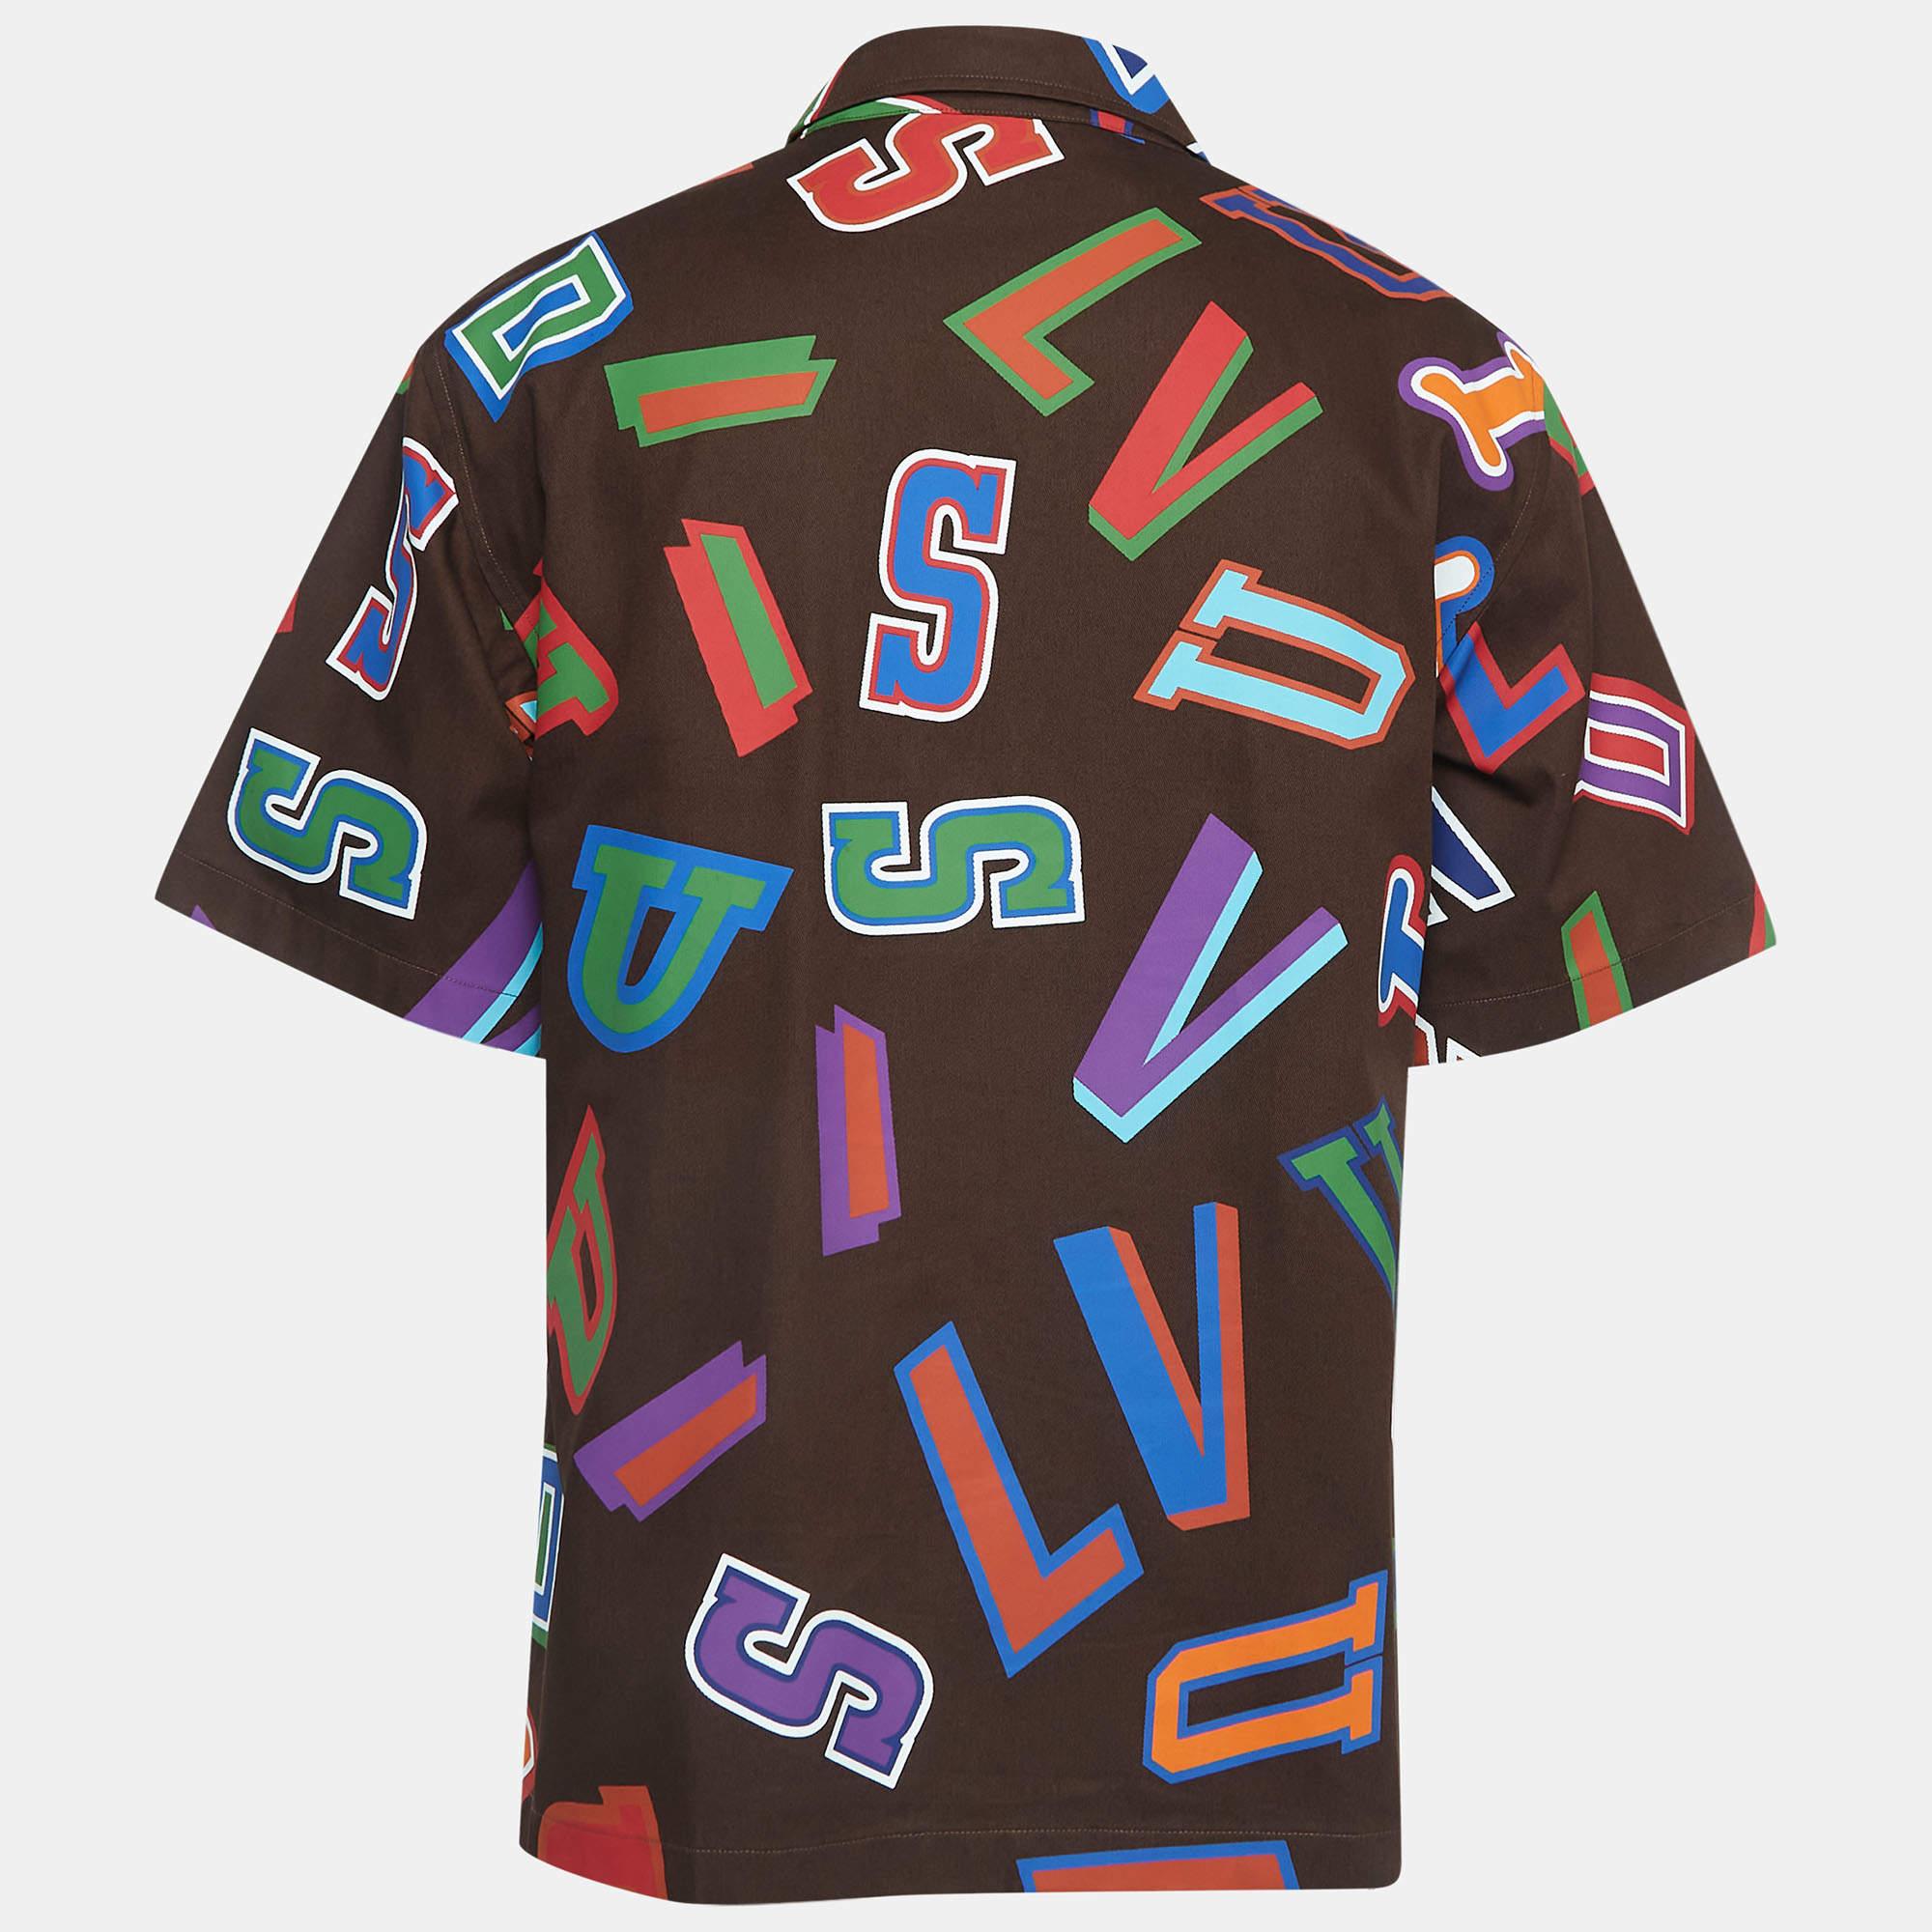 Indulge in the pinnacle of luxury and sporty sophistication with the Louis Vuitton X NBA shirt. Crafted with exquisite attention to detail, it blends iconic LV monogram motifs with the energetic spirit of basketball, epitomizing refined athletic